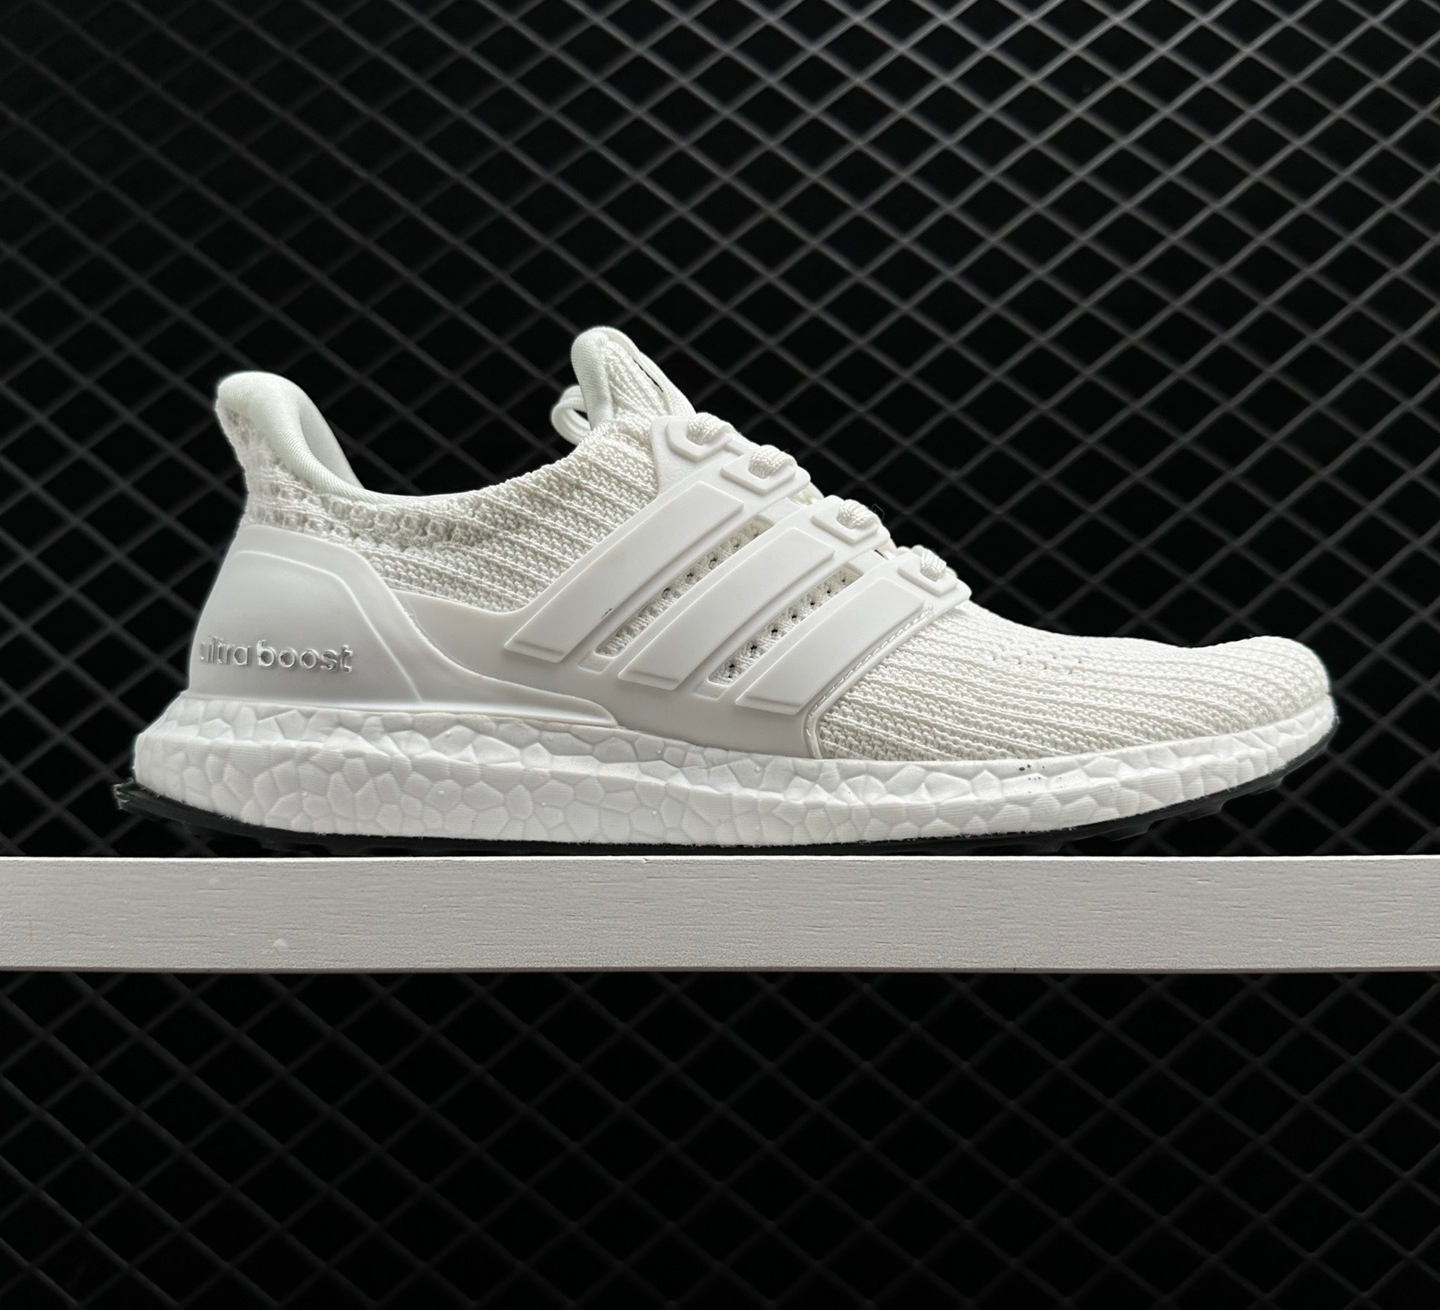 Adidas UltraBoost 4.0 Triple White - Stylish and Comfortable Running Sneakers